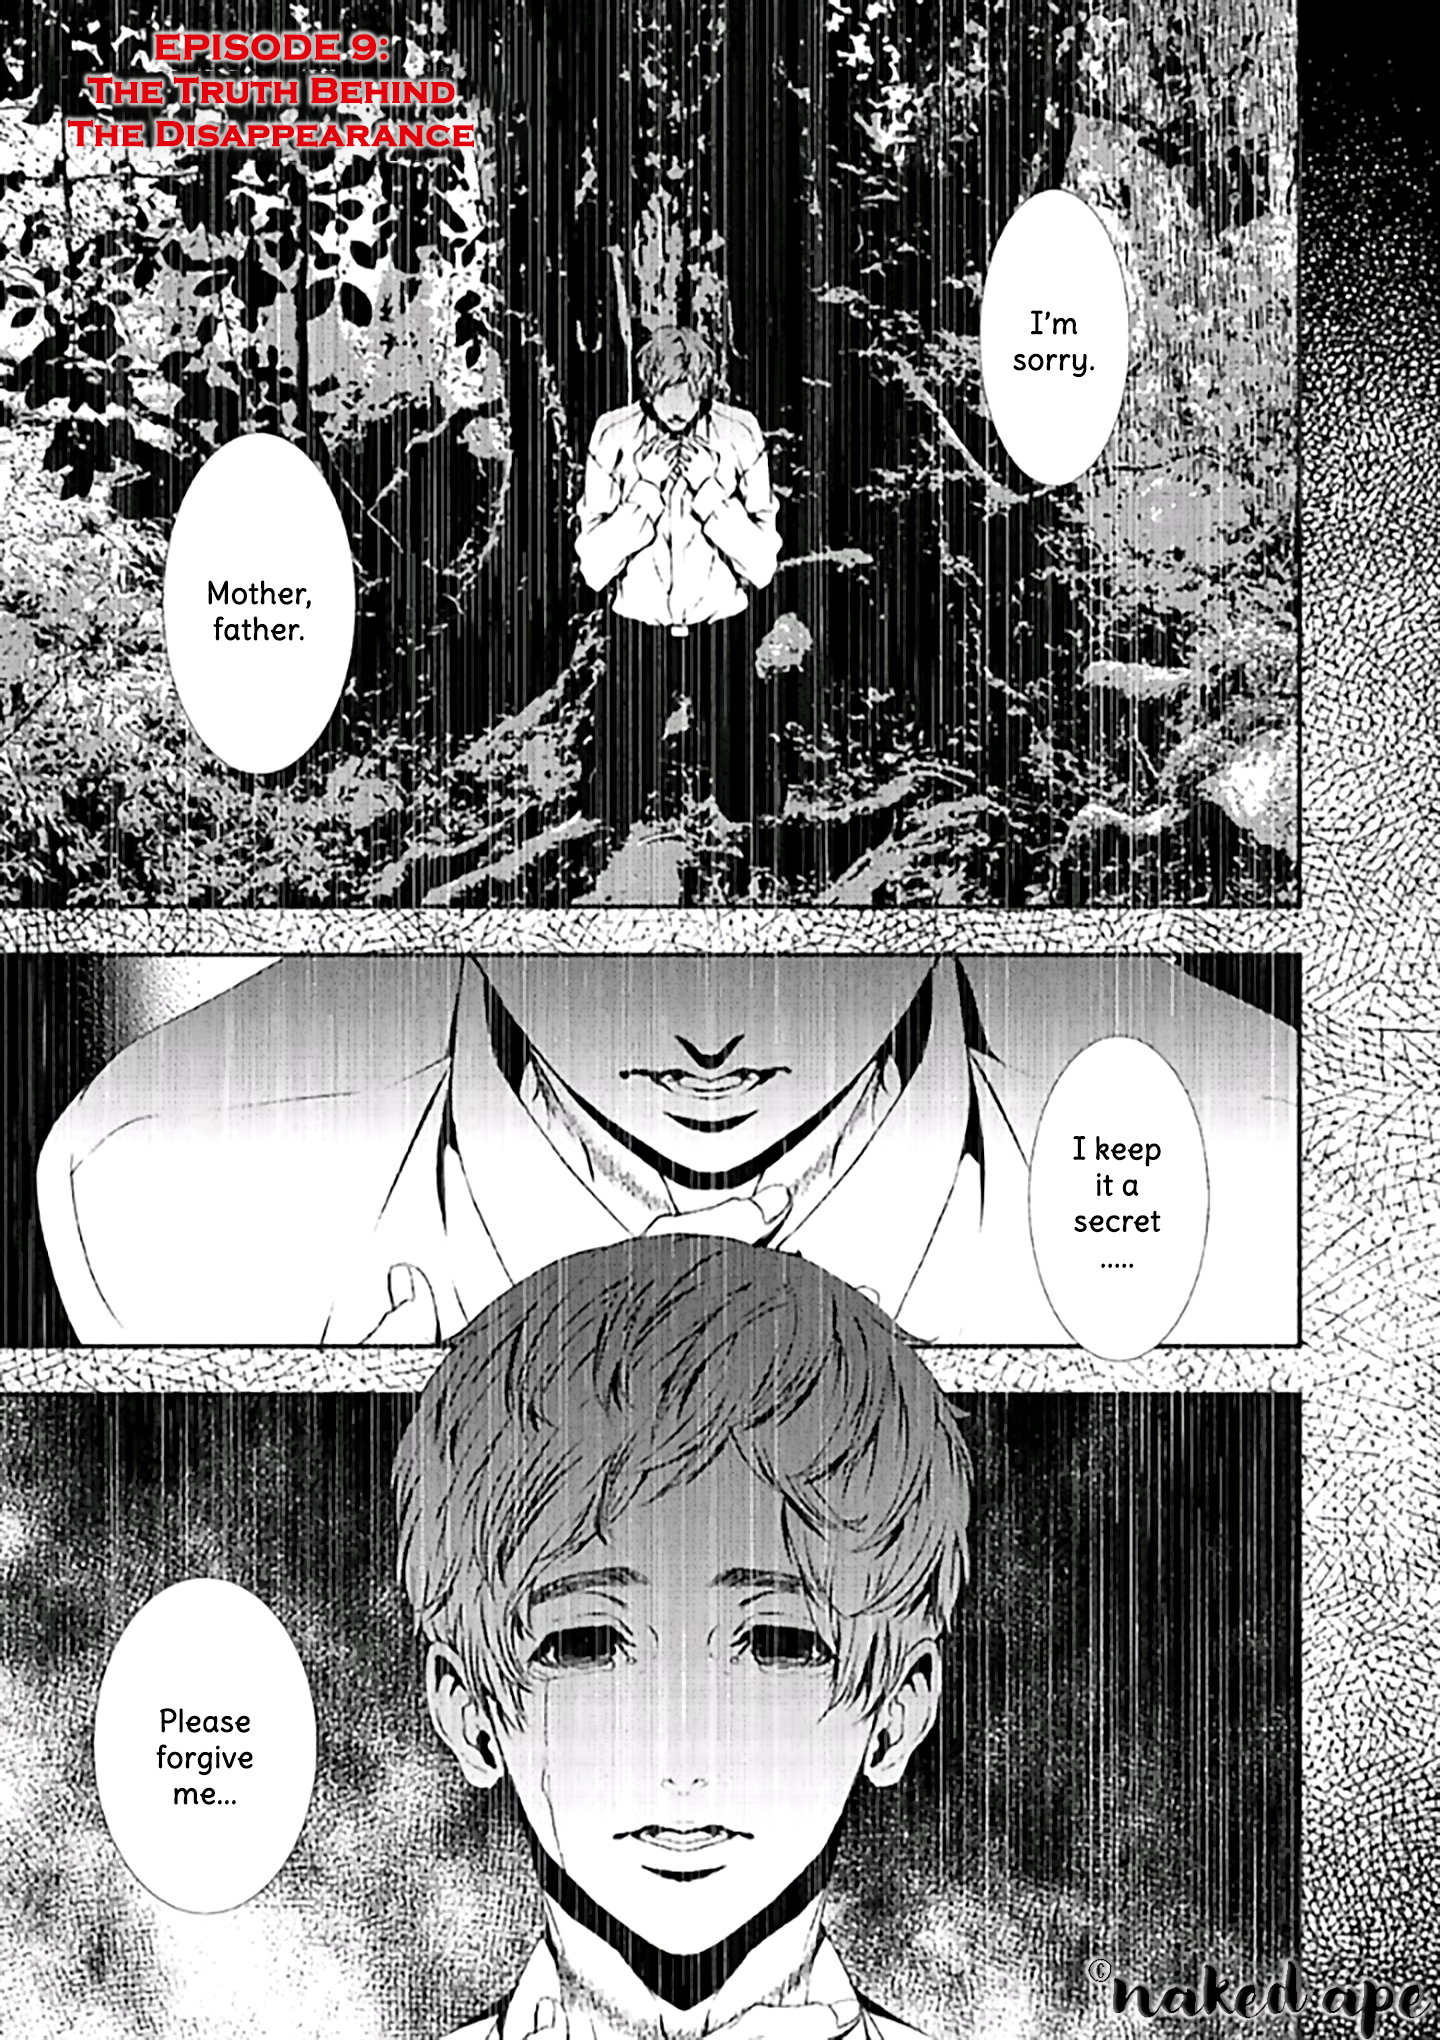 Suicide Line Vol.2 Chapter 9: Episode 9 : The Truth Behind The Disappearance - Picture 1